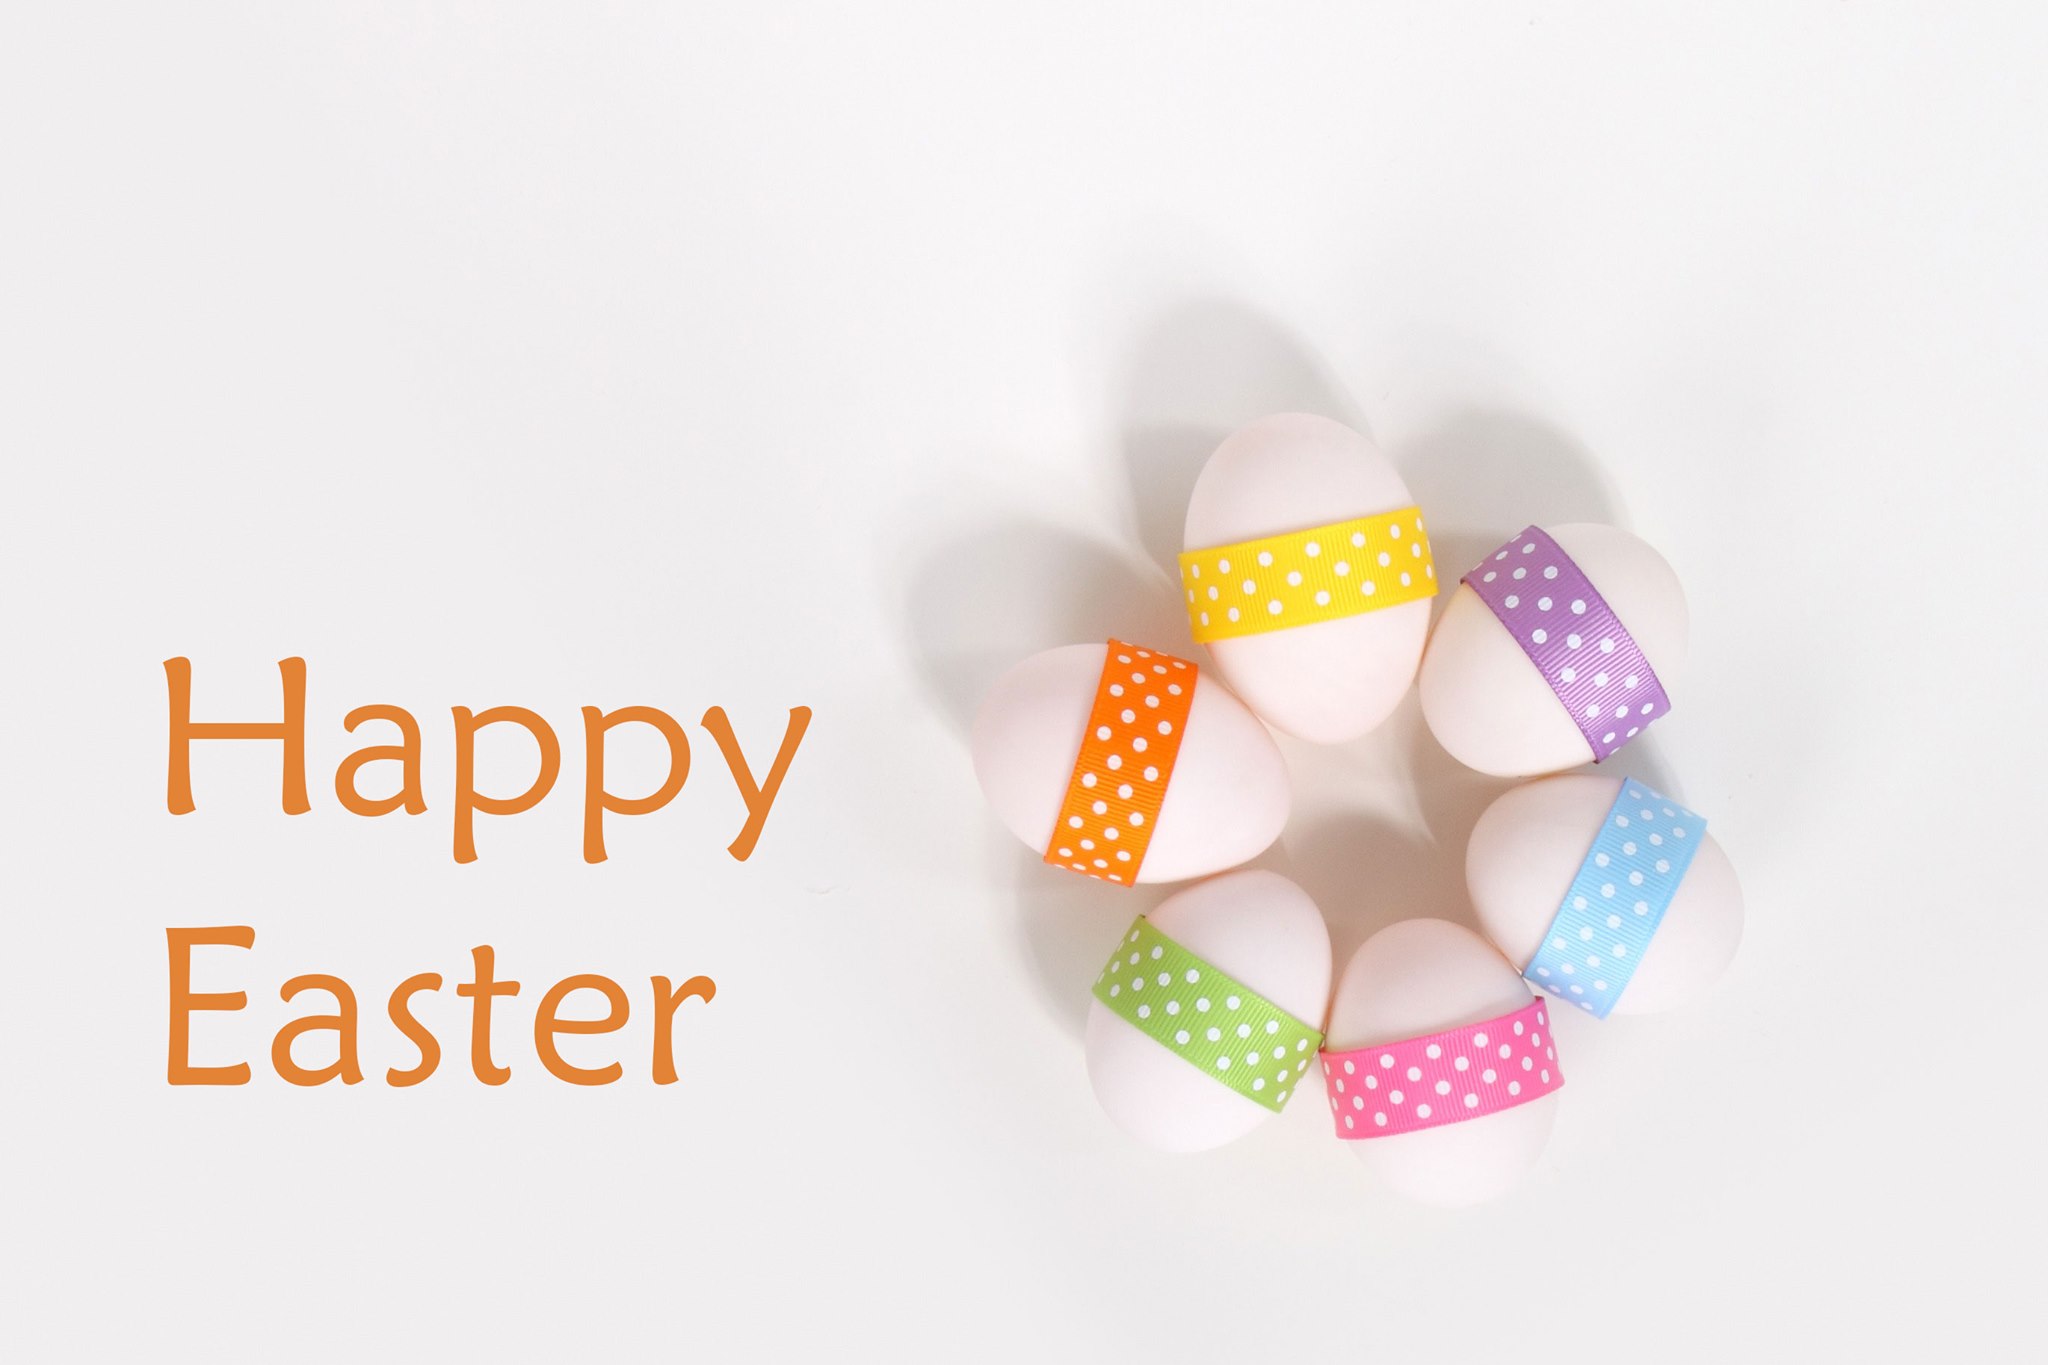 While Easter may be celebrated a little differently this year, we wish you and y...